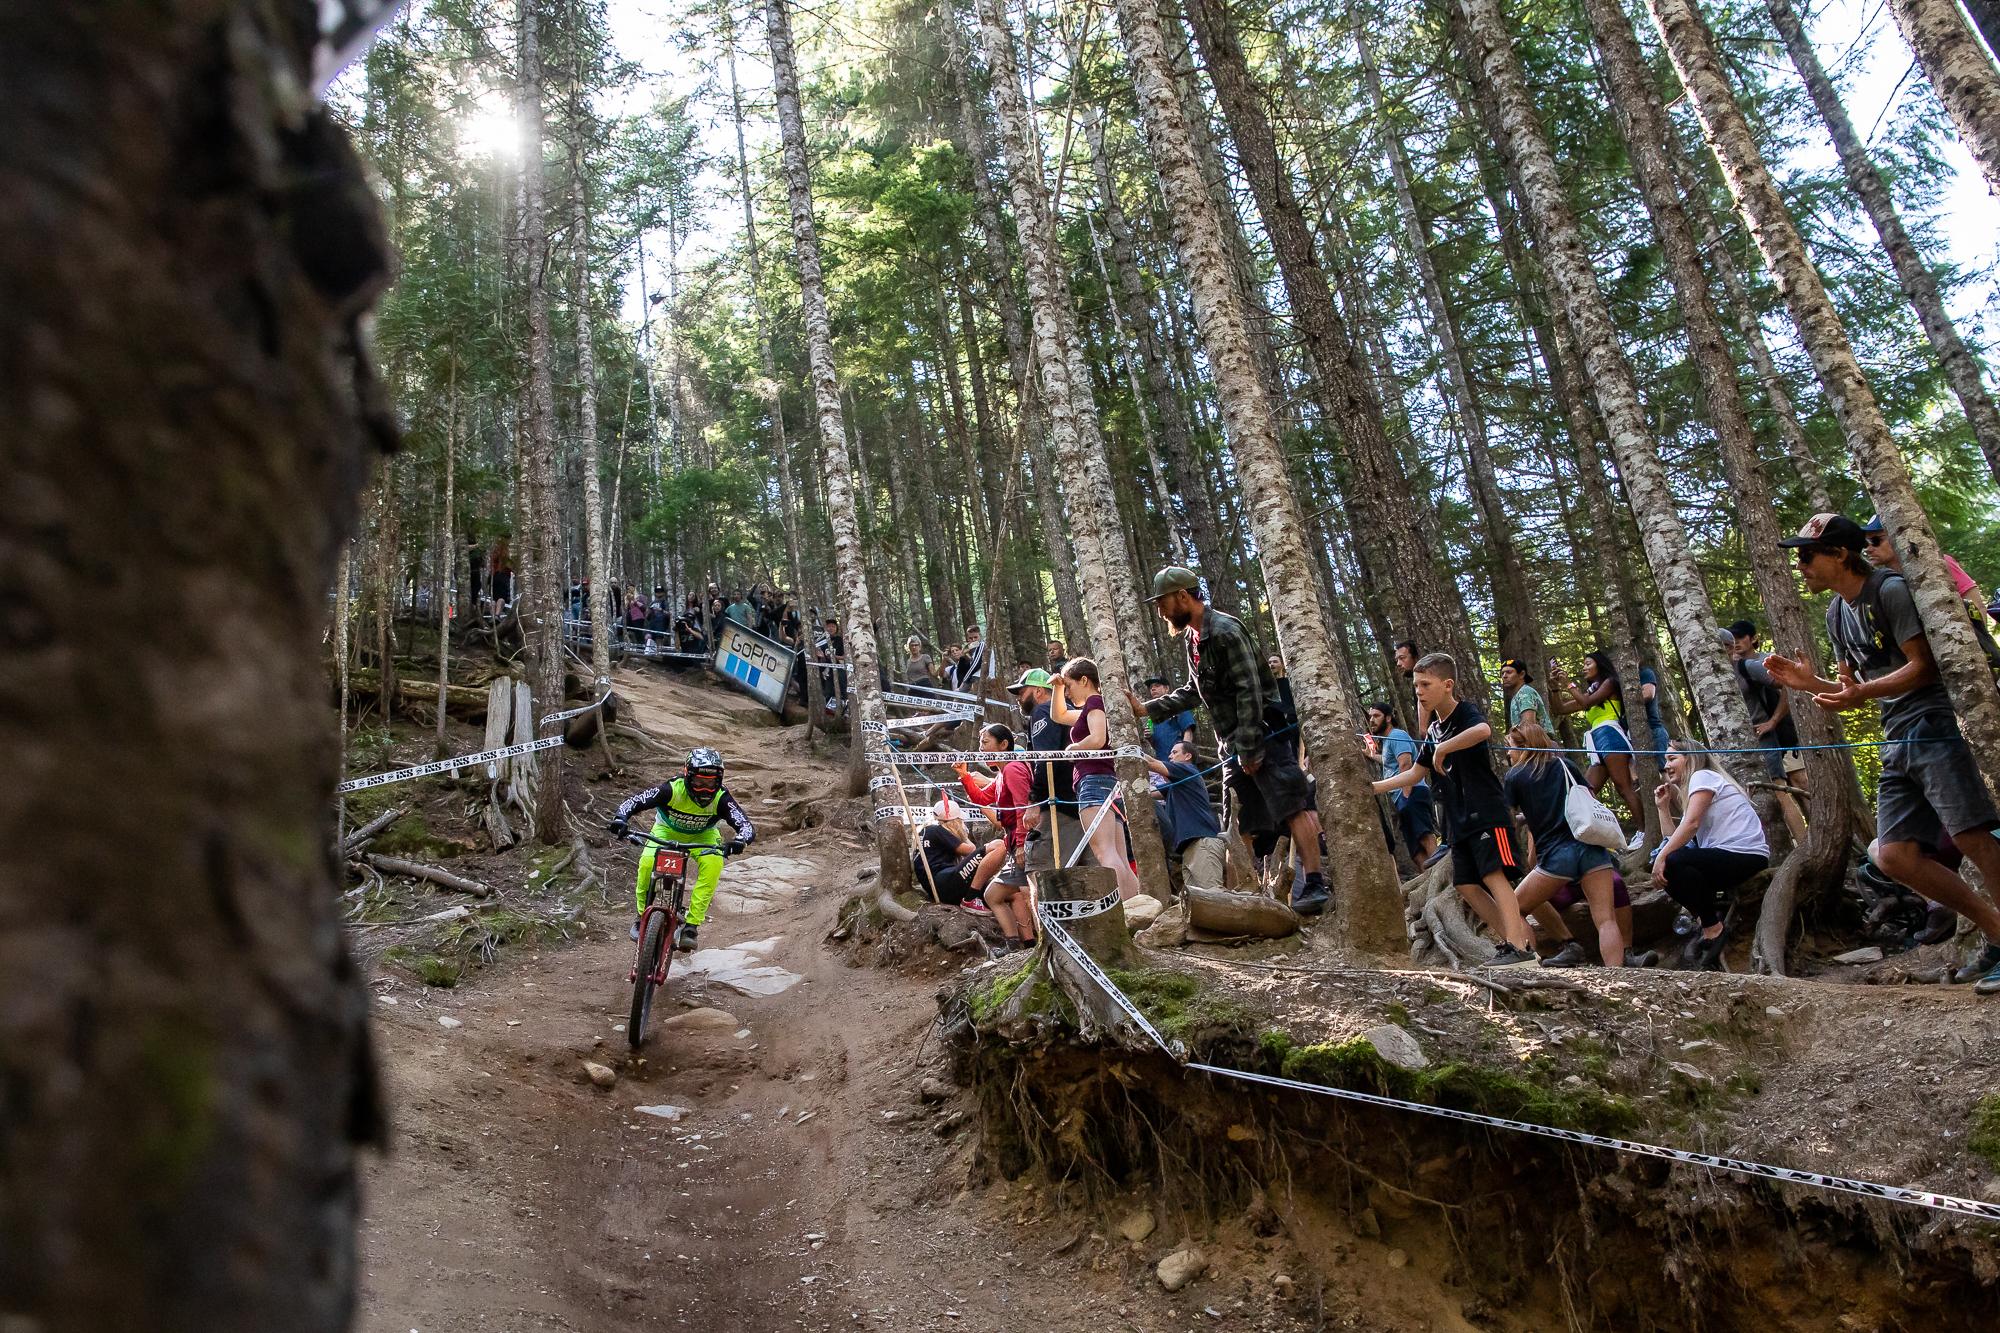 Mitch Ropelato on the Canadian Open DH course during Crankworx Whistler